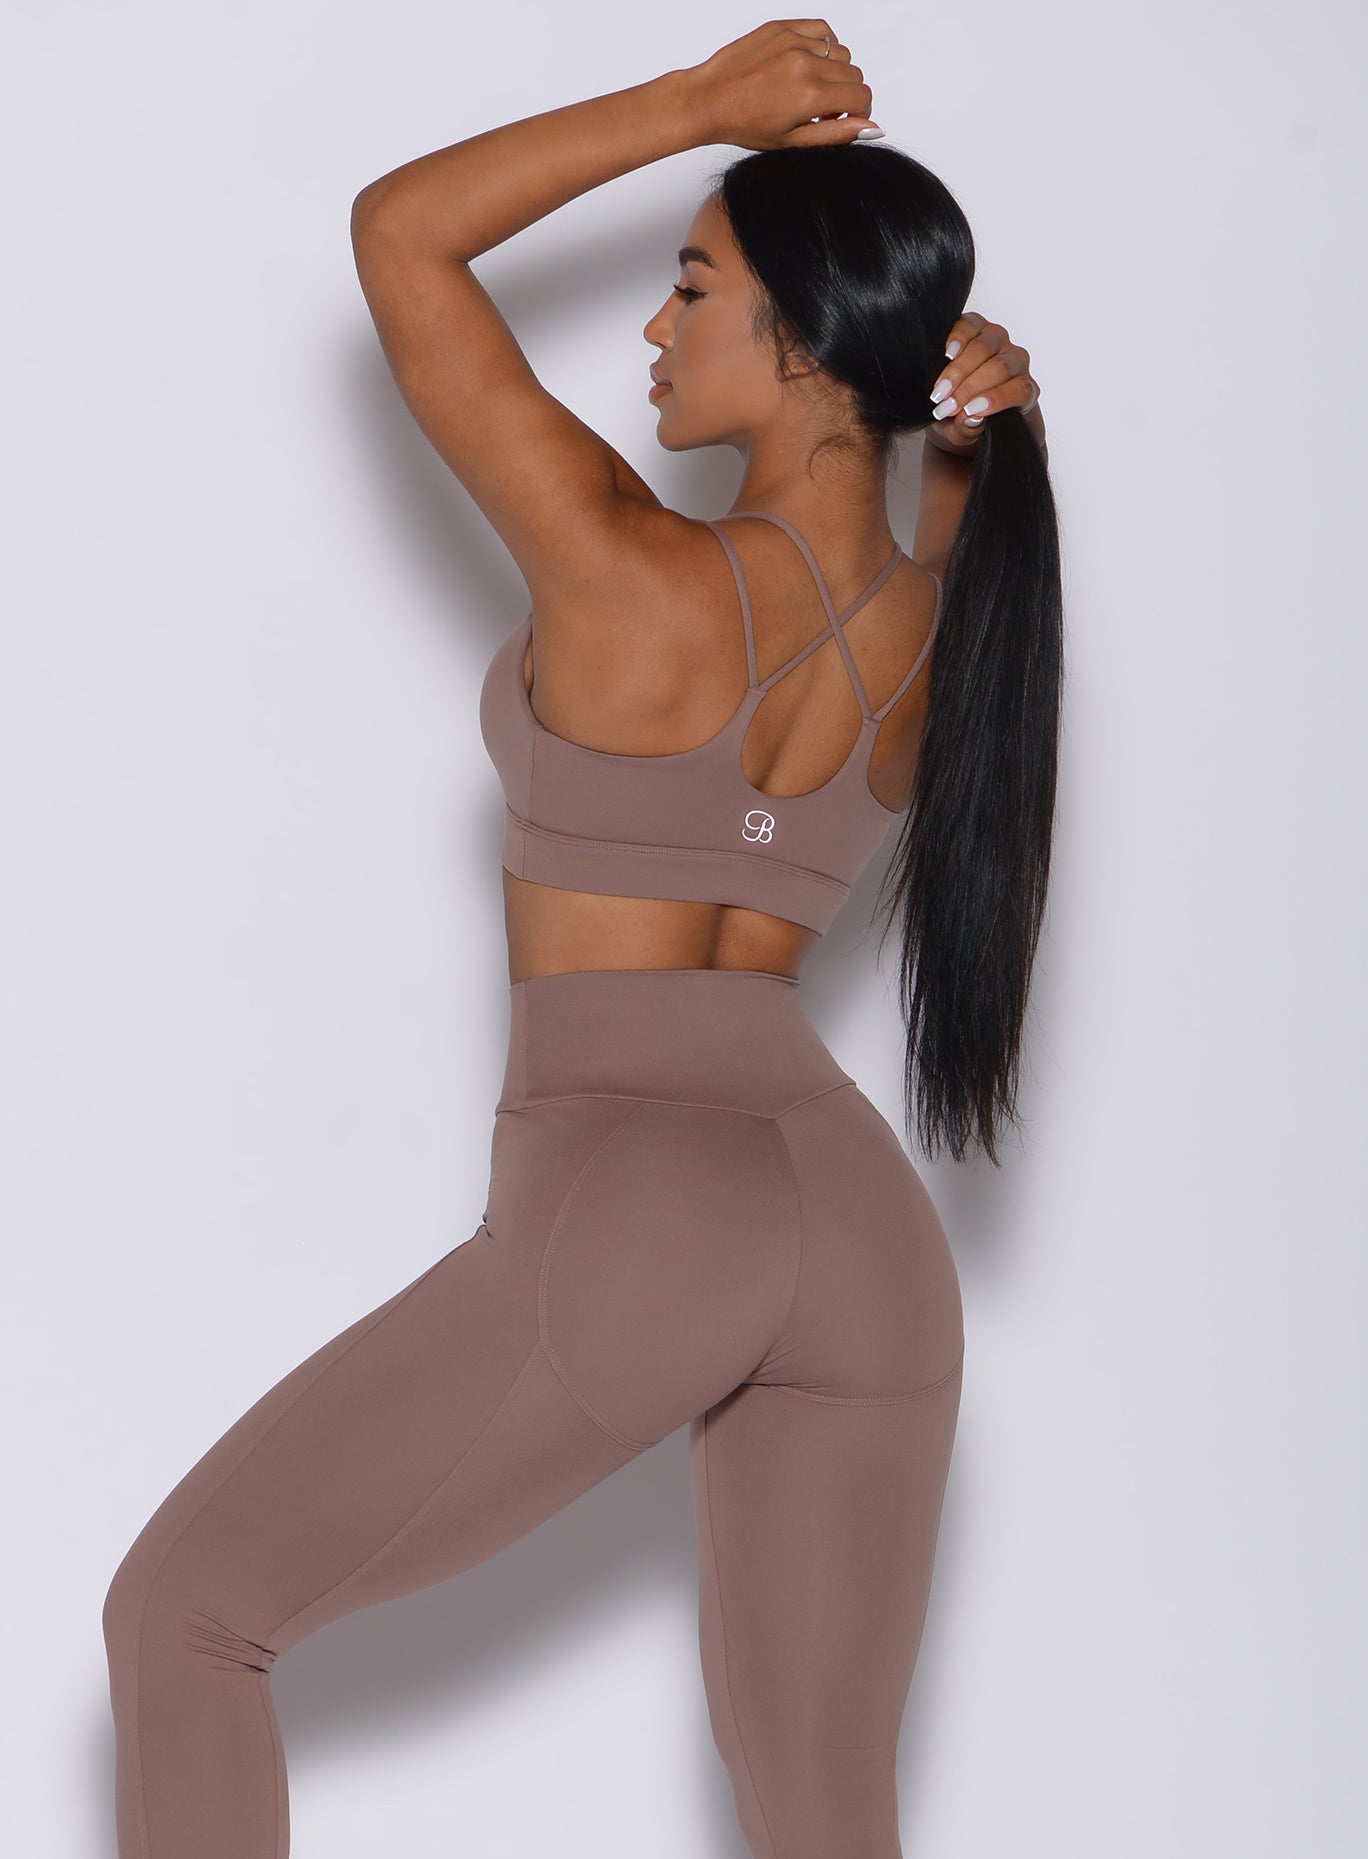 Back profile view of a model wearing our twist sports bra in tan color and a matching leggings